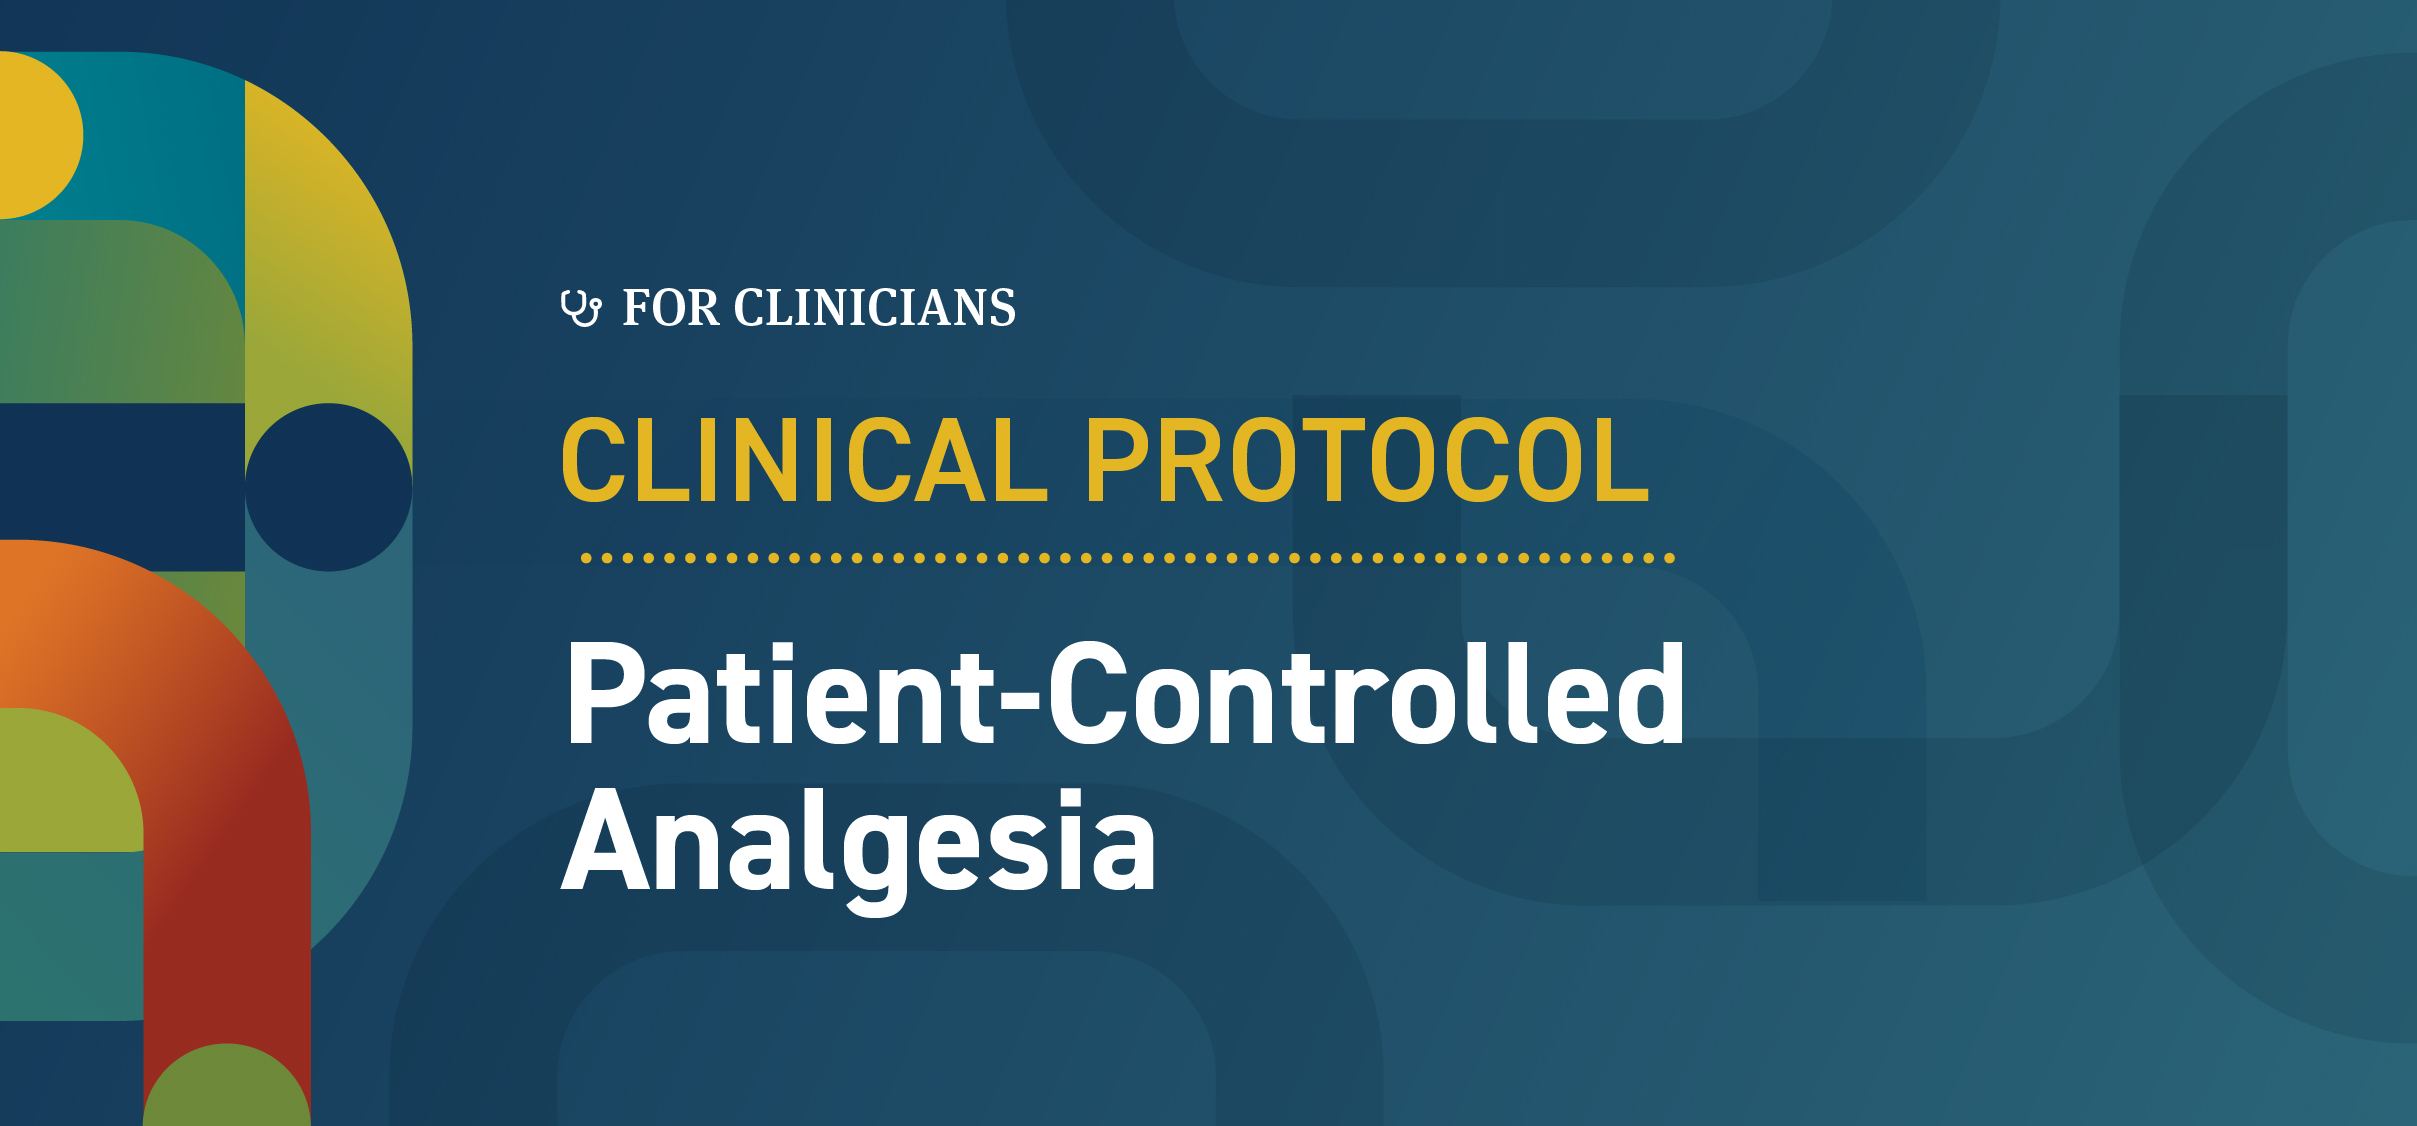 Patient-Controlled Analgesia